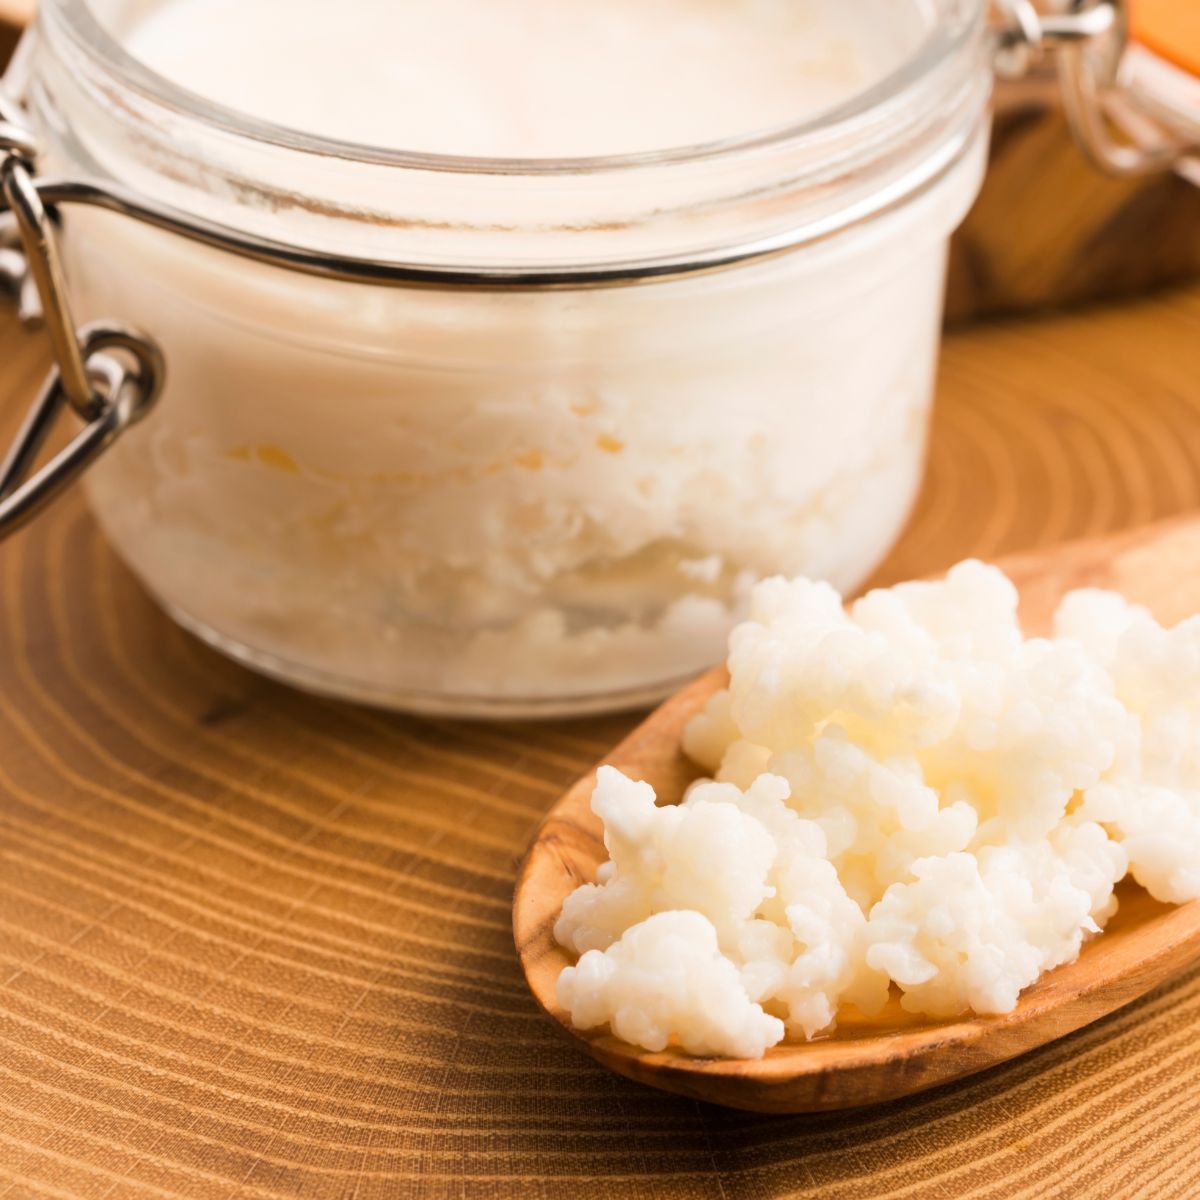 glass jar and wooden spoon with milk kefir grains